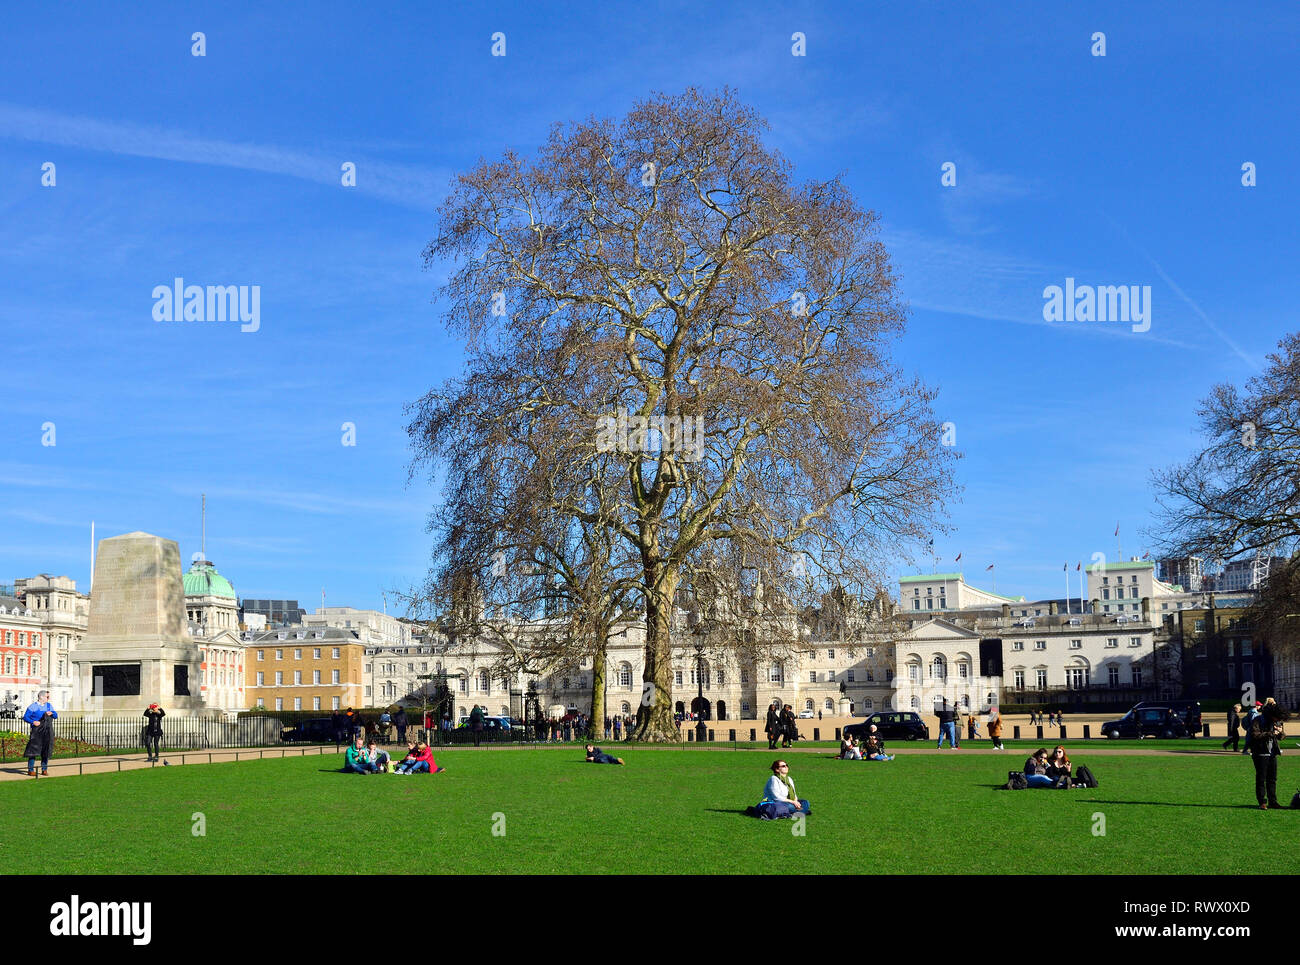 London, England, UK. St James's Park - a warm sunny day in February 2019 Stock Photo